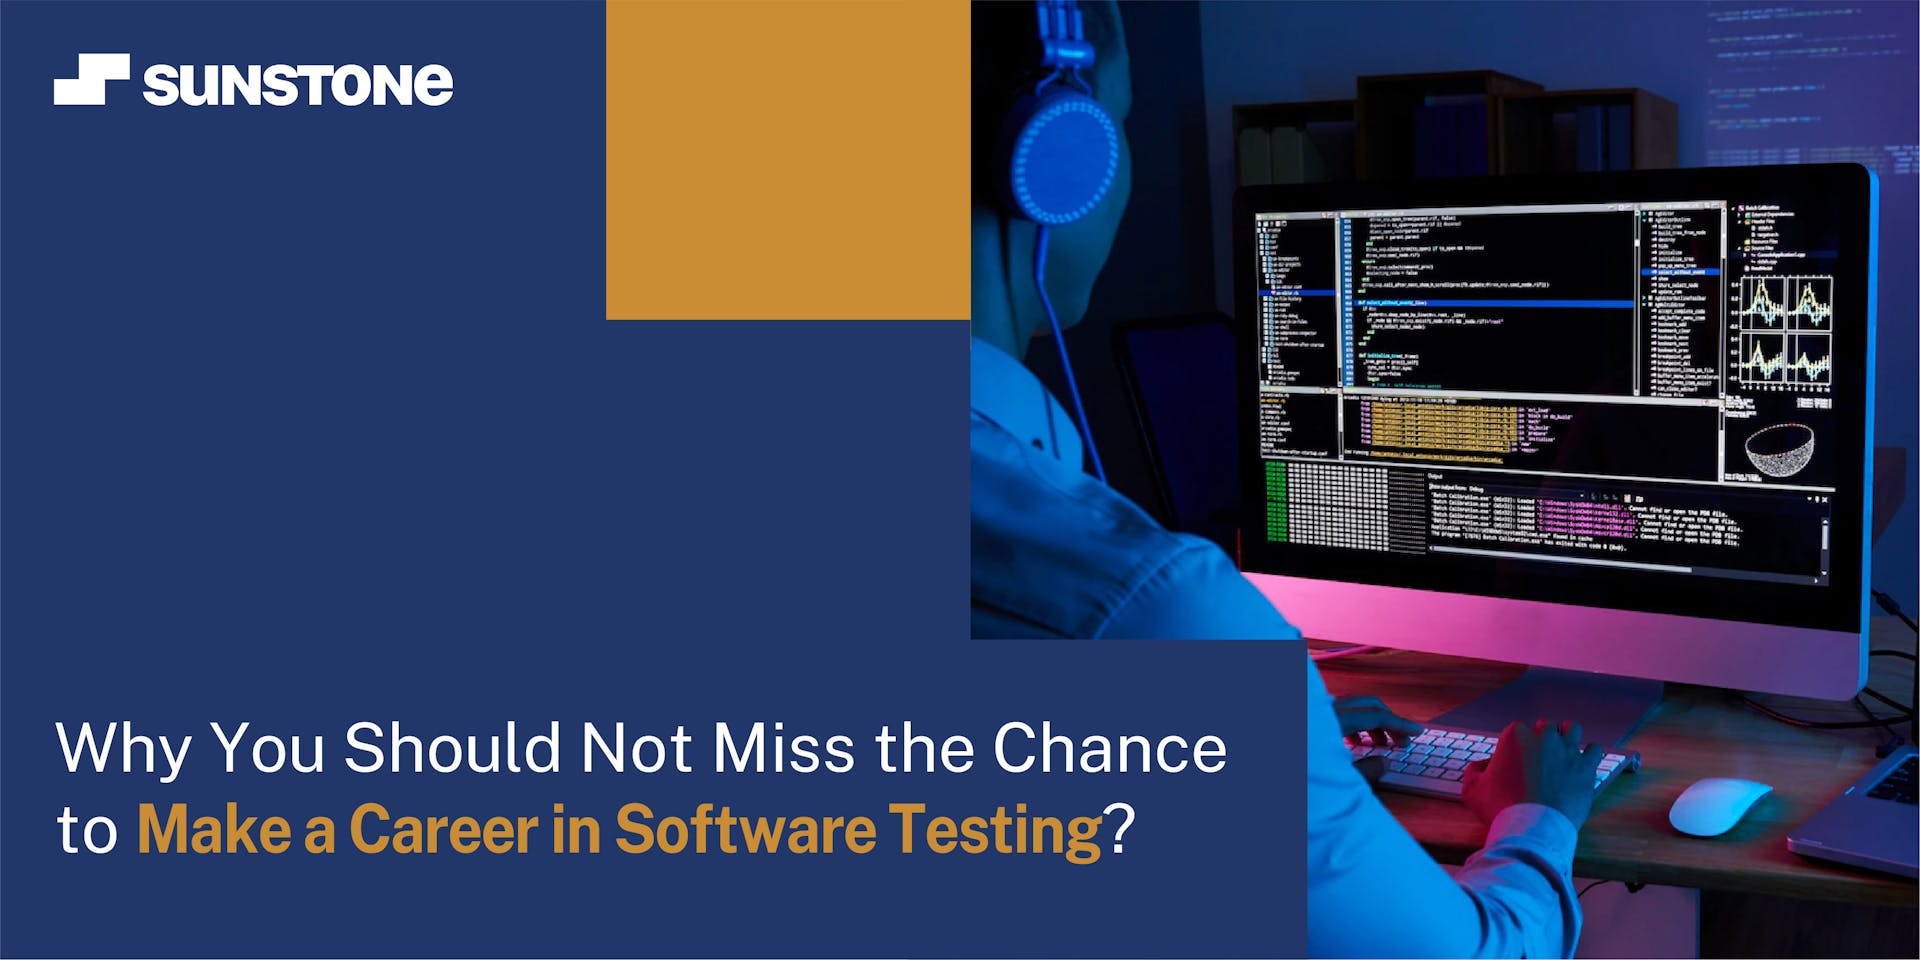 Why You Should Consider a Career in Software Testing?